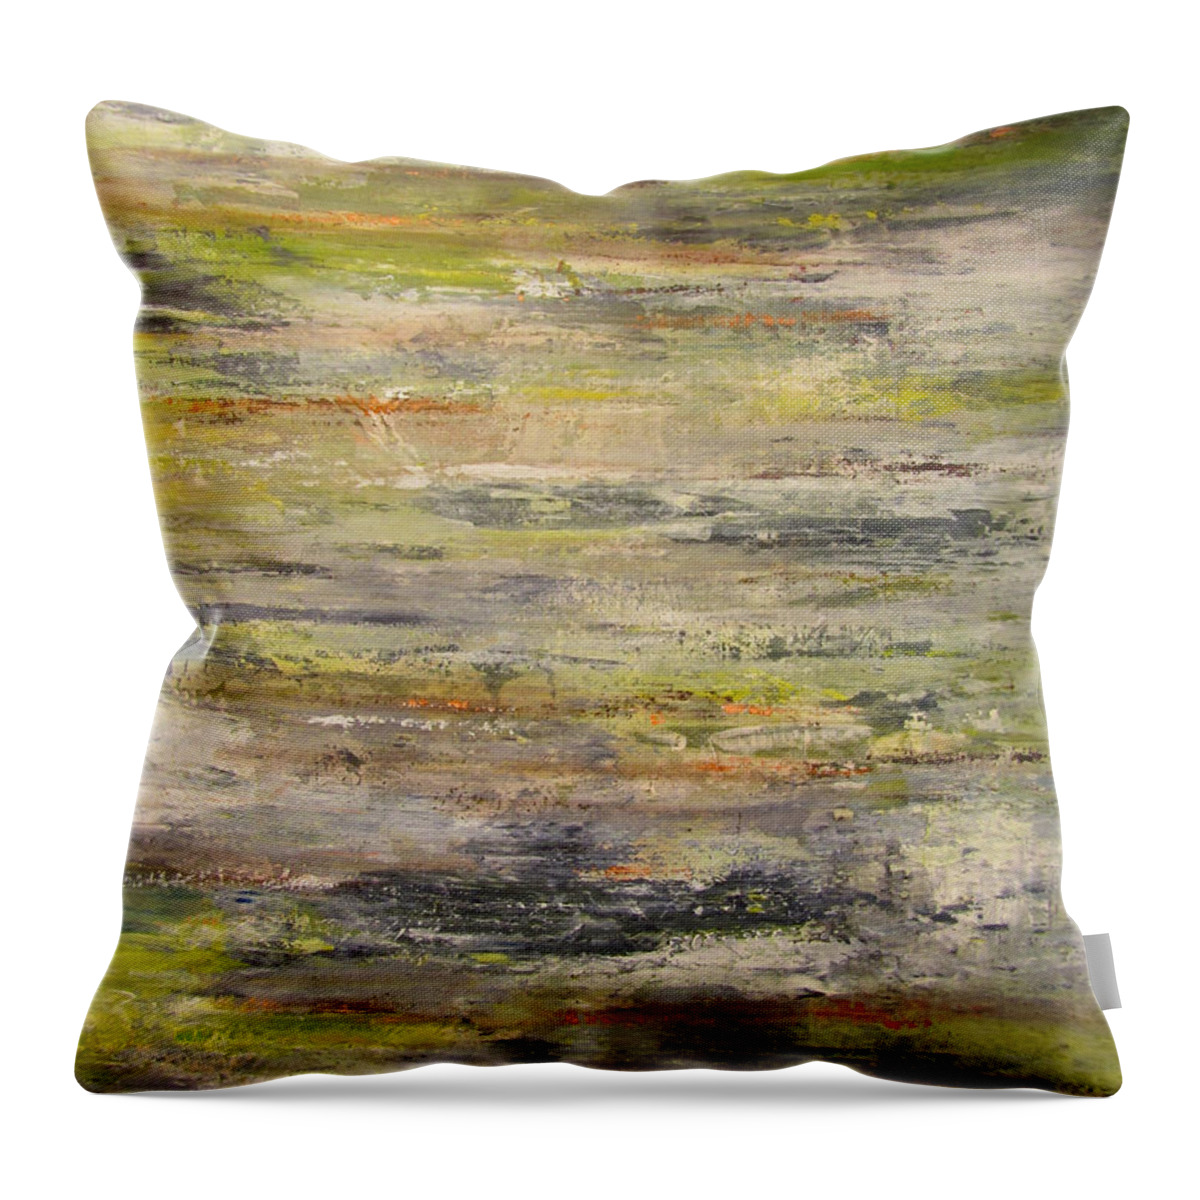 Abstract Throw Pillow featuring the painting Nature's Pleasure by Roberta Rotunda